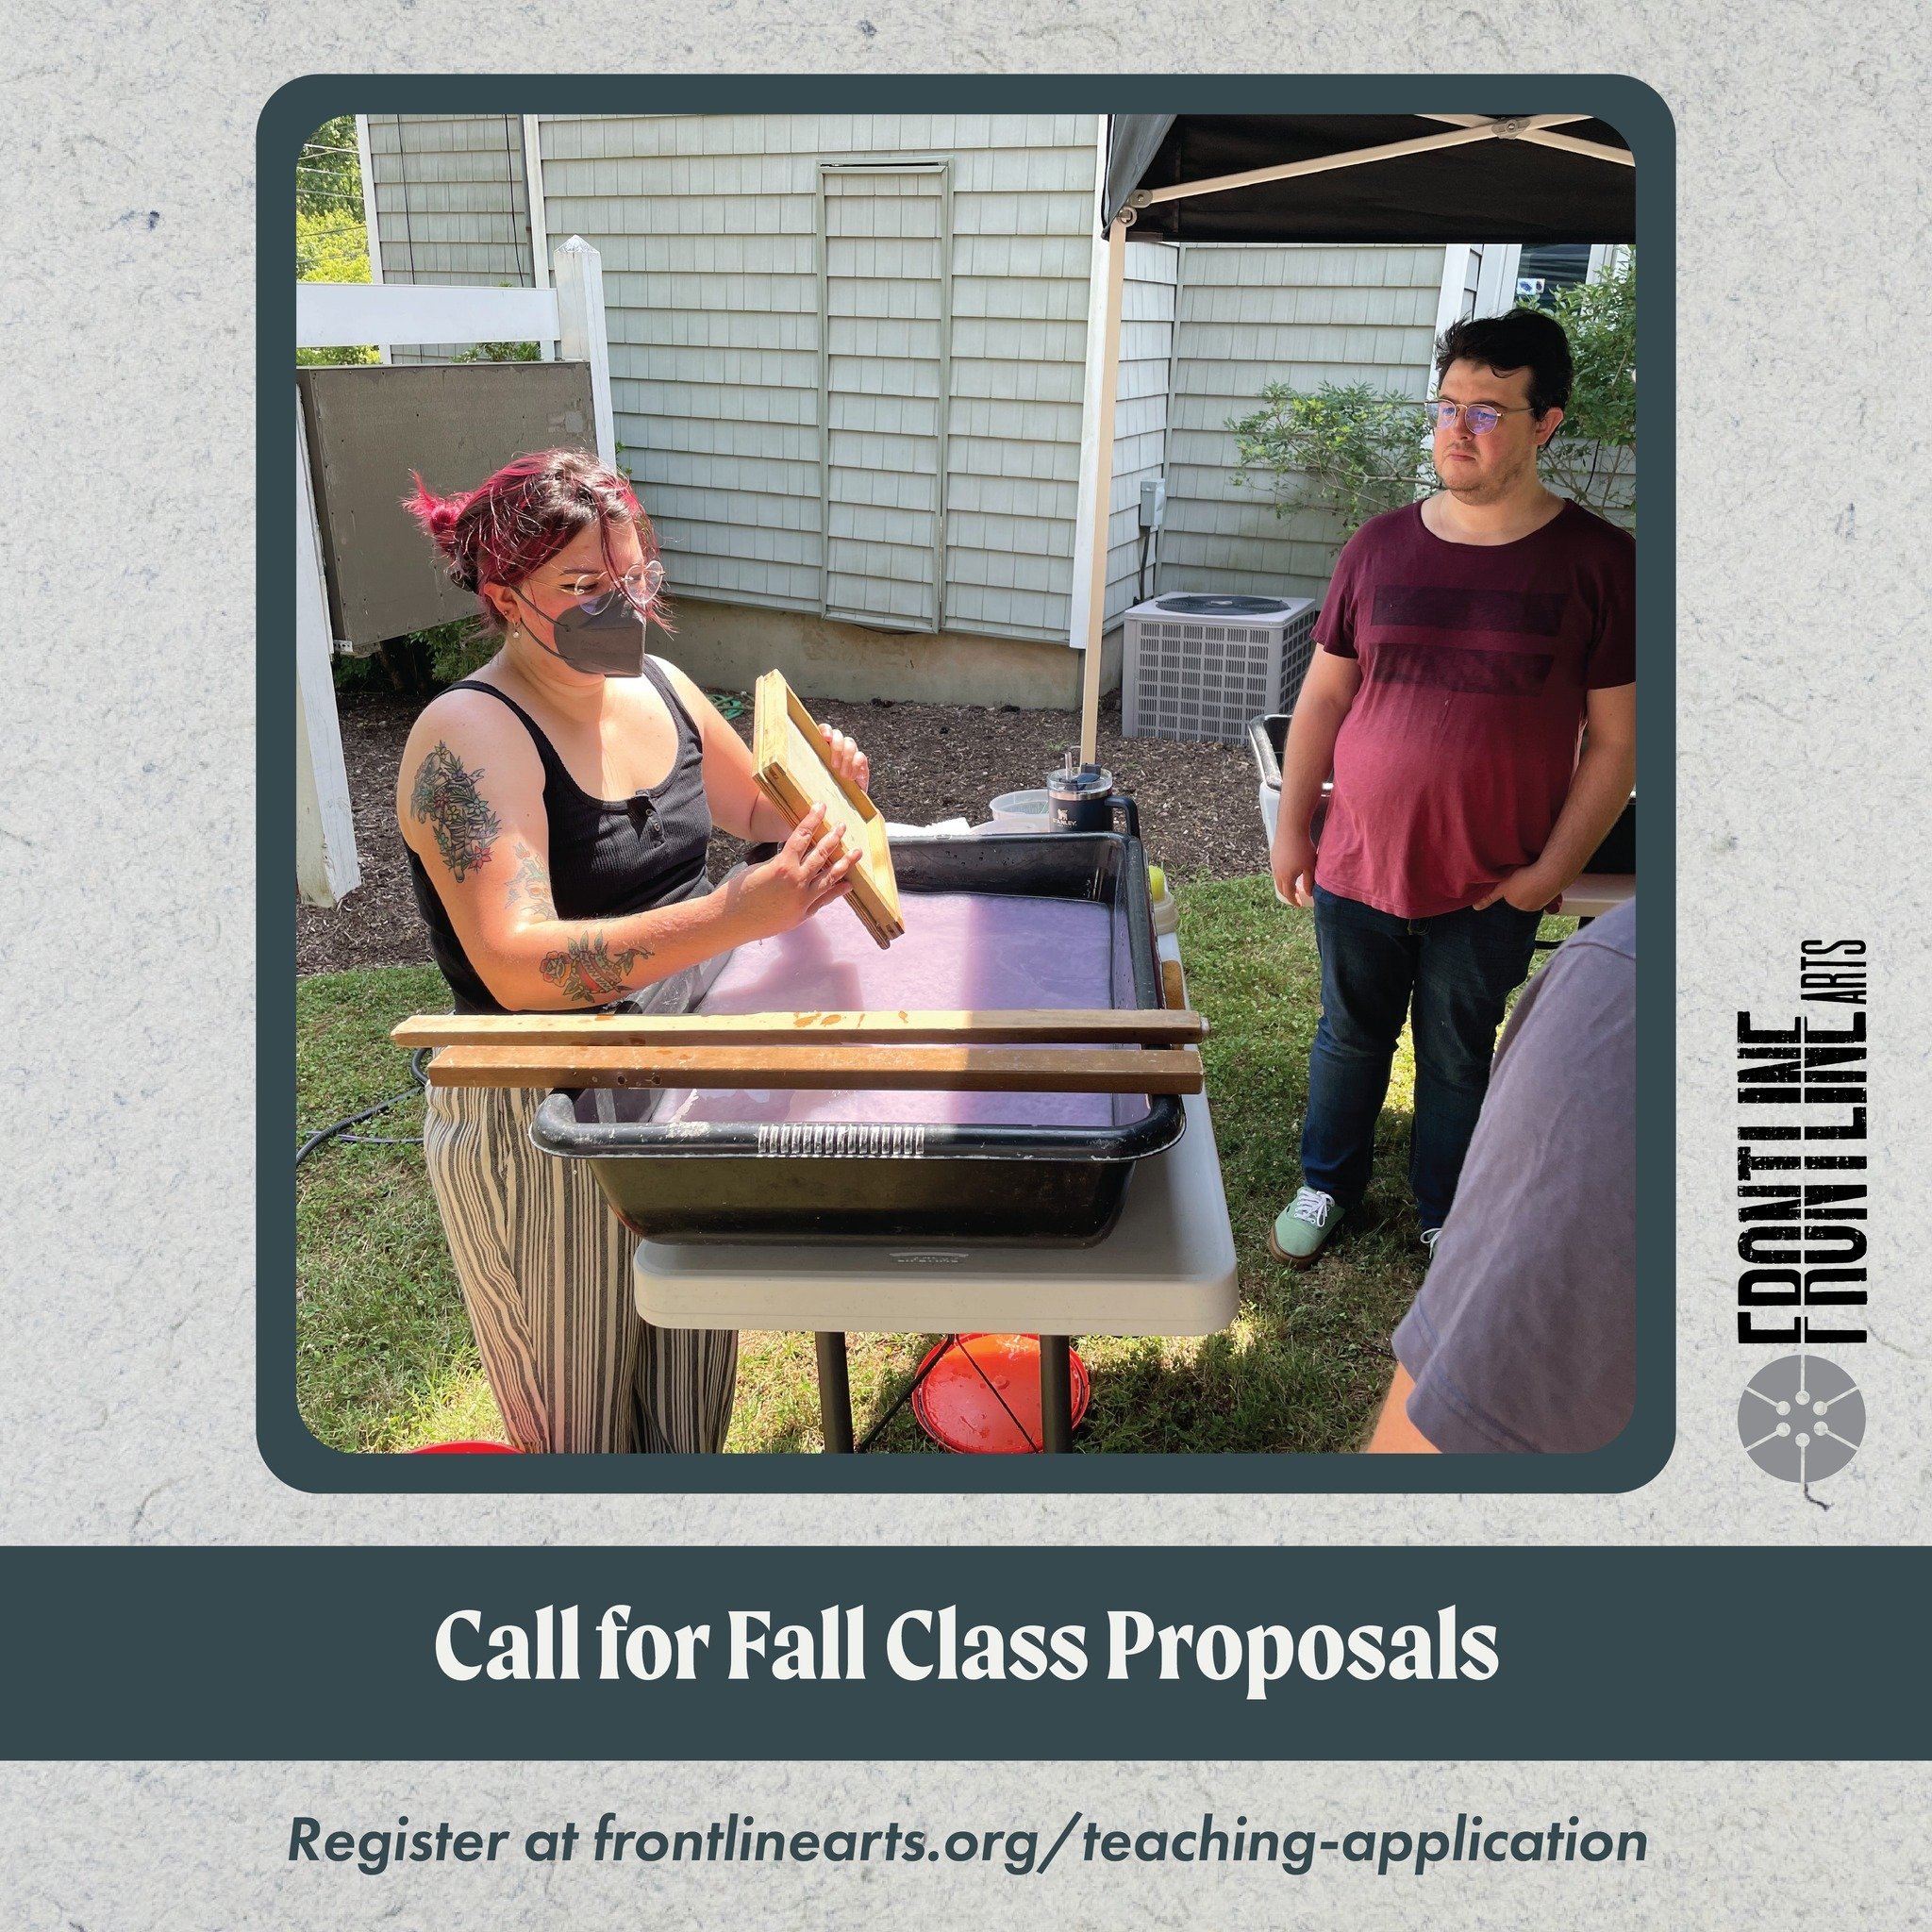 Calling all local printmakers, papermakers, and book artists! Frontline Arts is currently accepting proposals for Fall classes for our Adult Education program.

We're seeking paid workshop ideas led by seasoned instructors. These workshops should ali